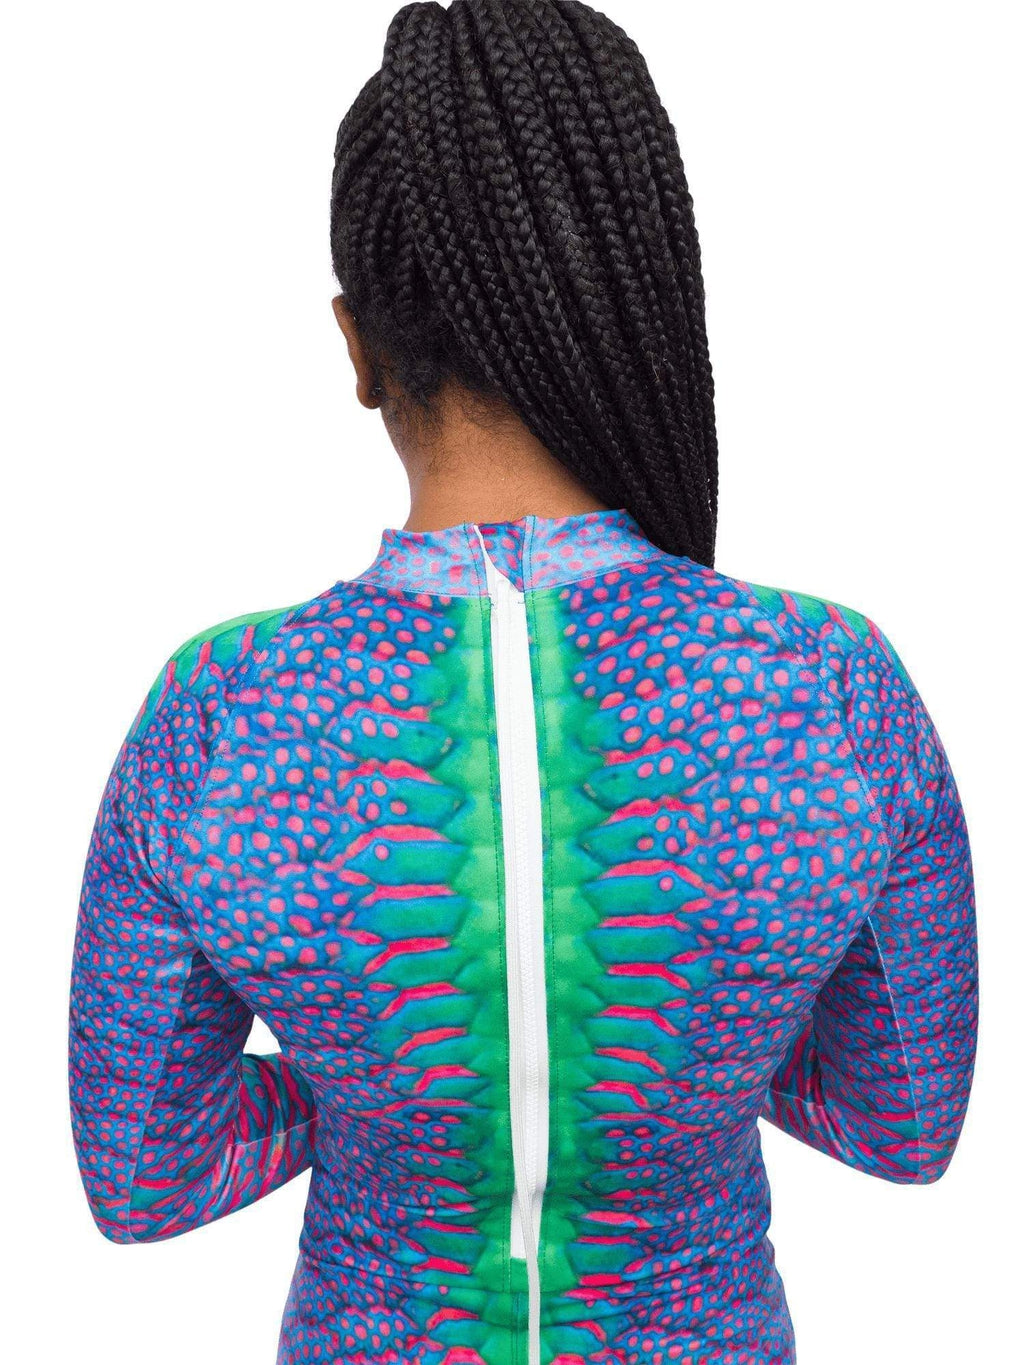 Waterlust parrotfish printed sun suit upper back close up from behind